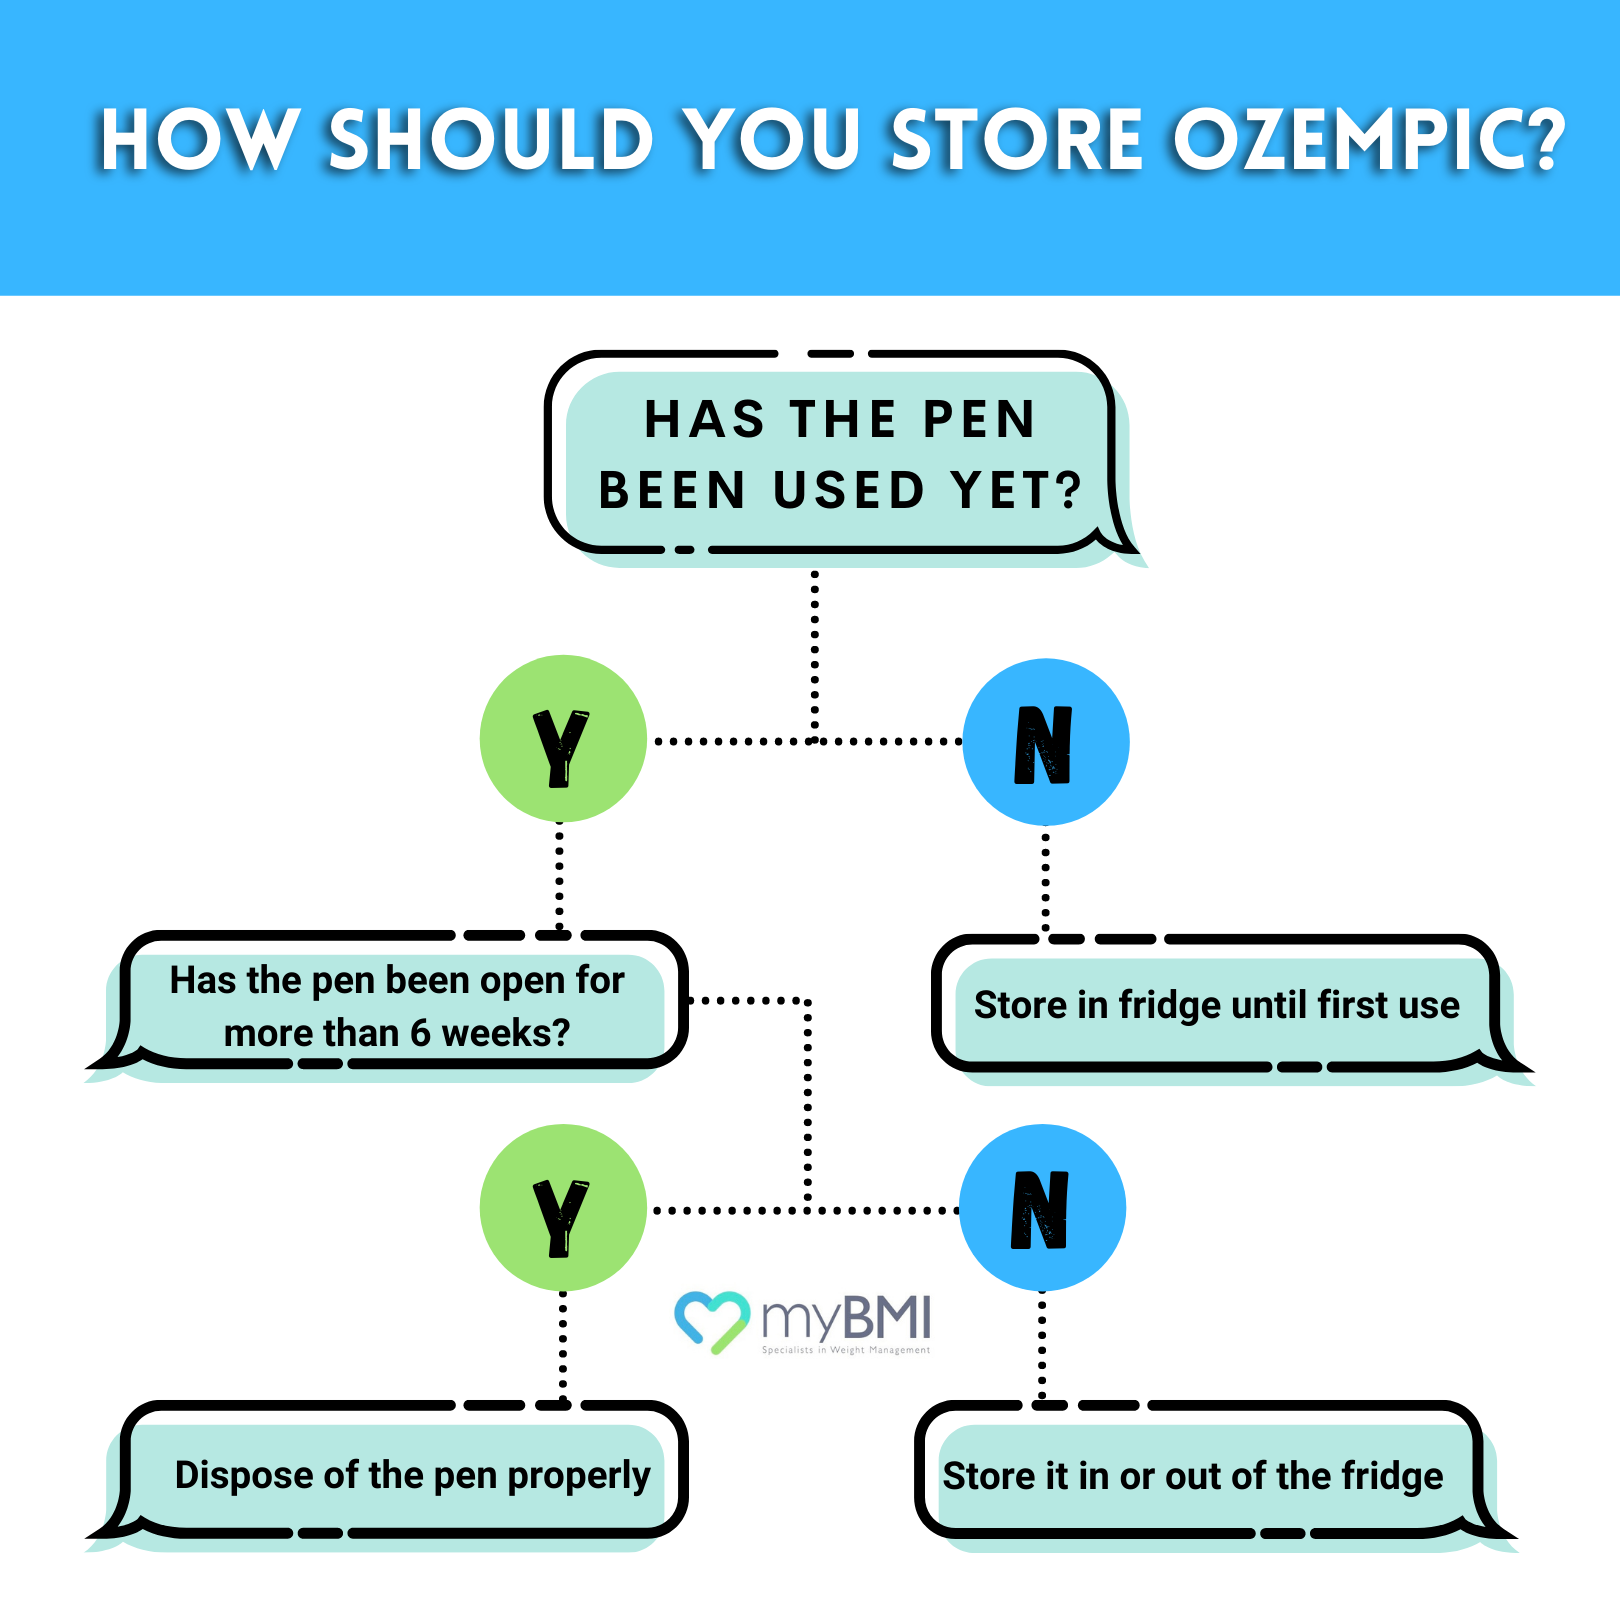 how to store ozempic